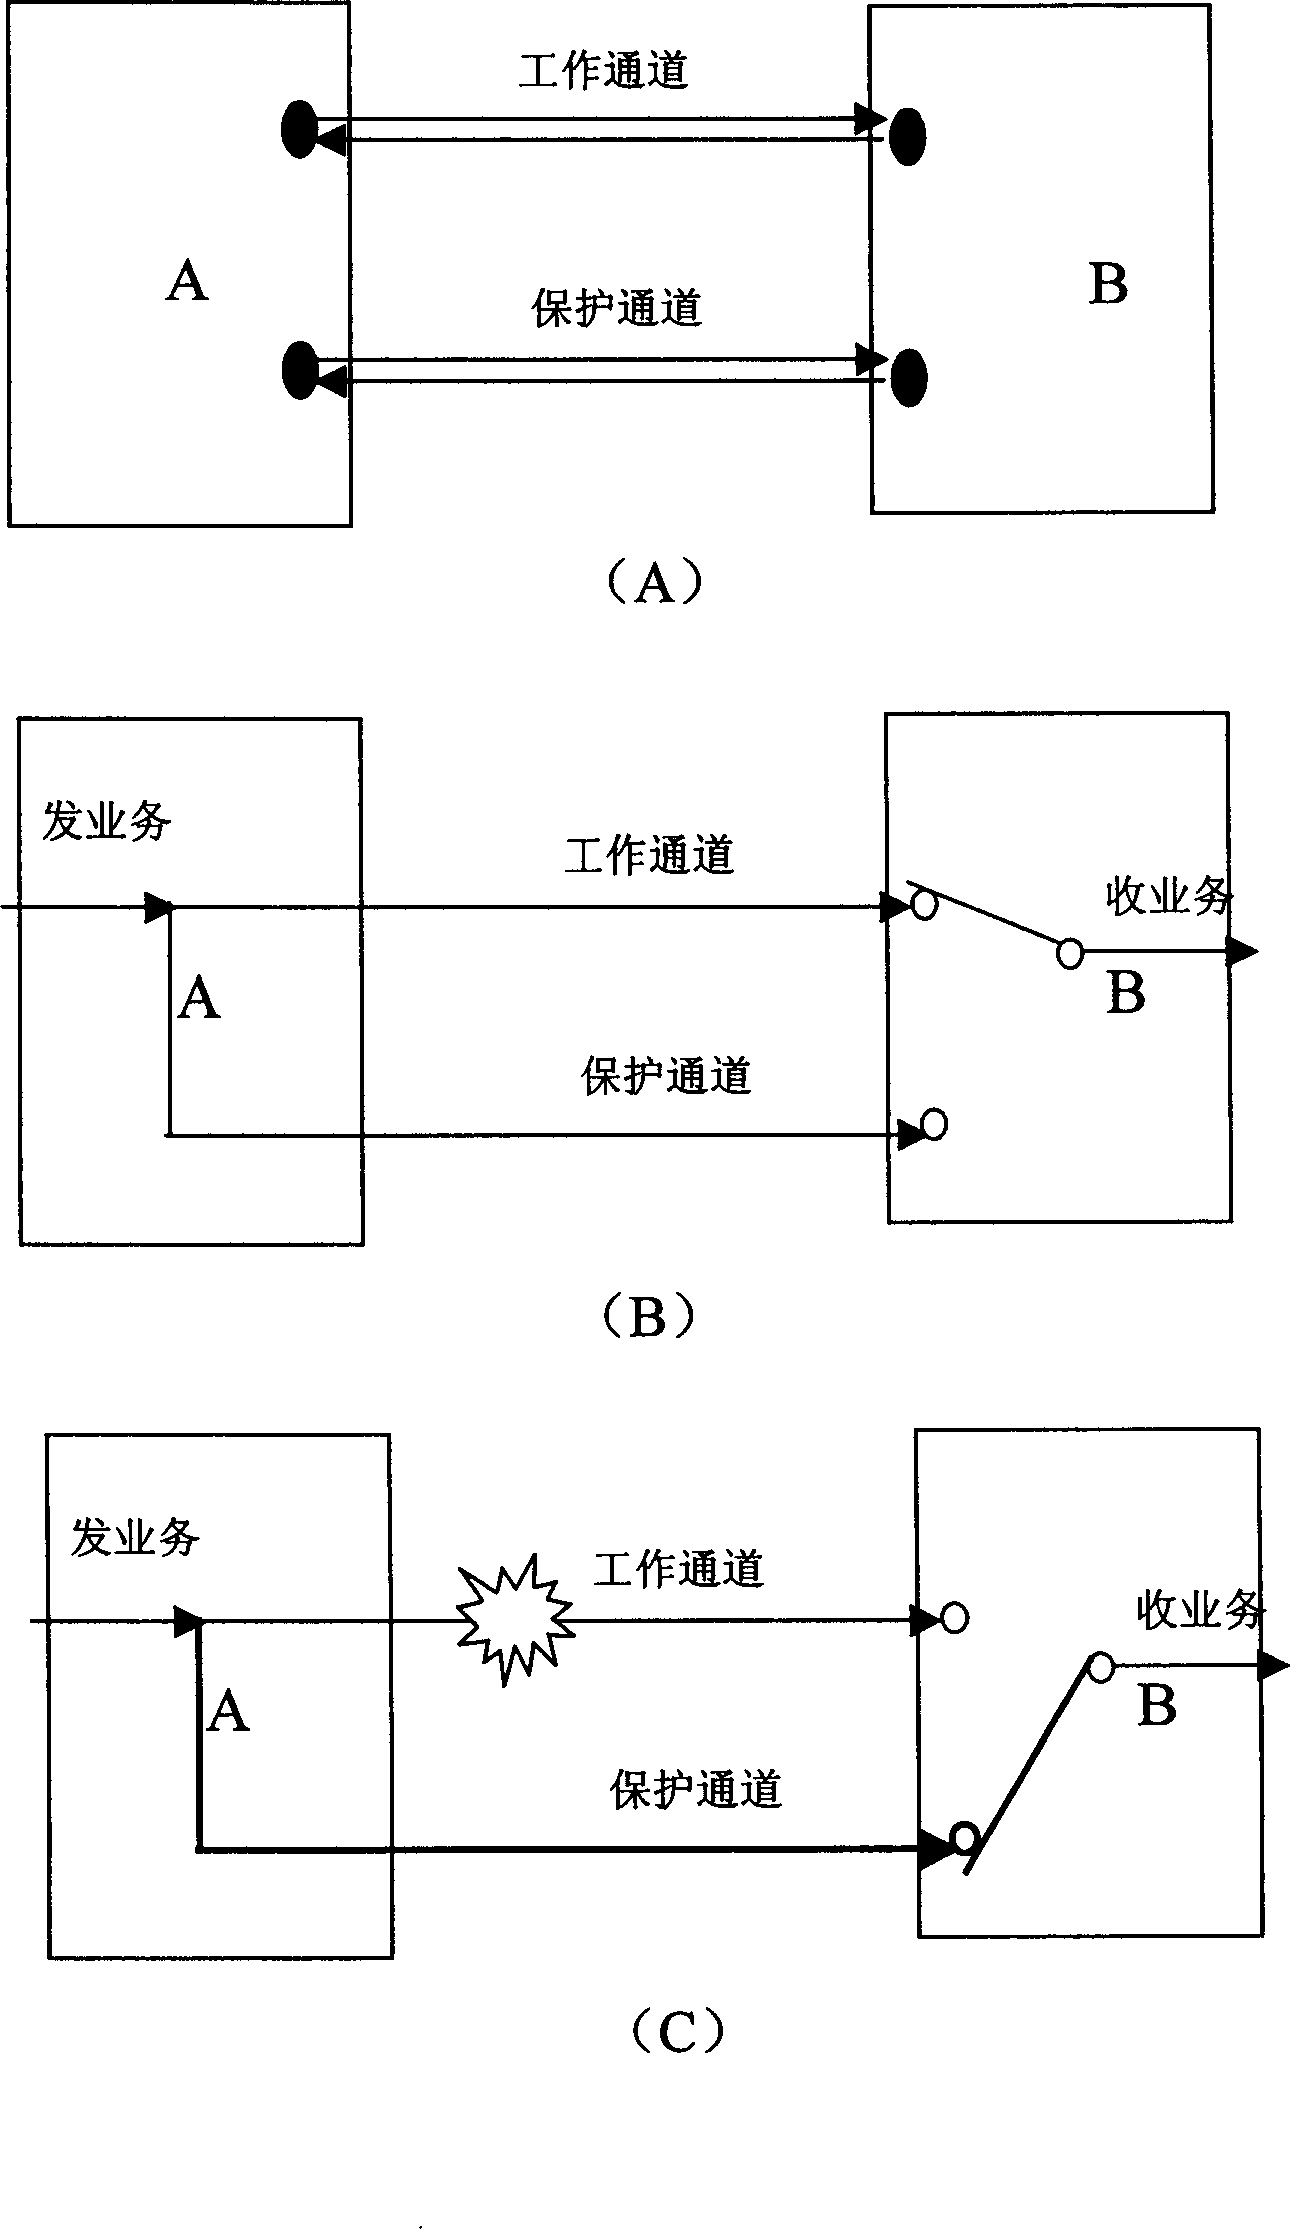 Flashing method of non-service cut-off of light transmission of link network